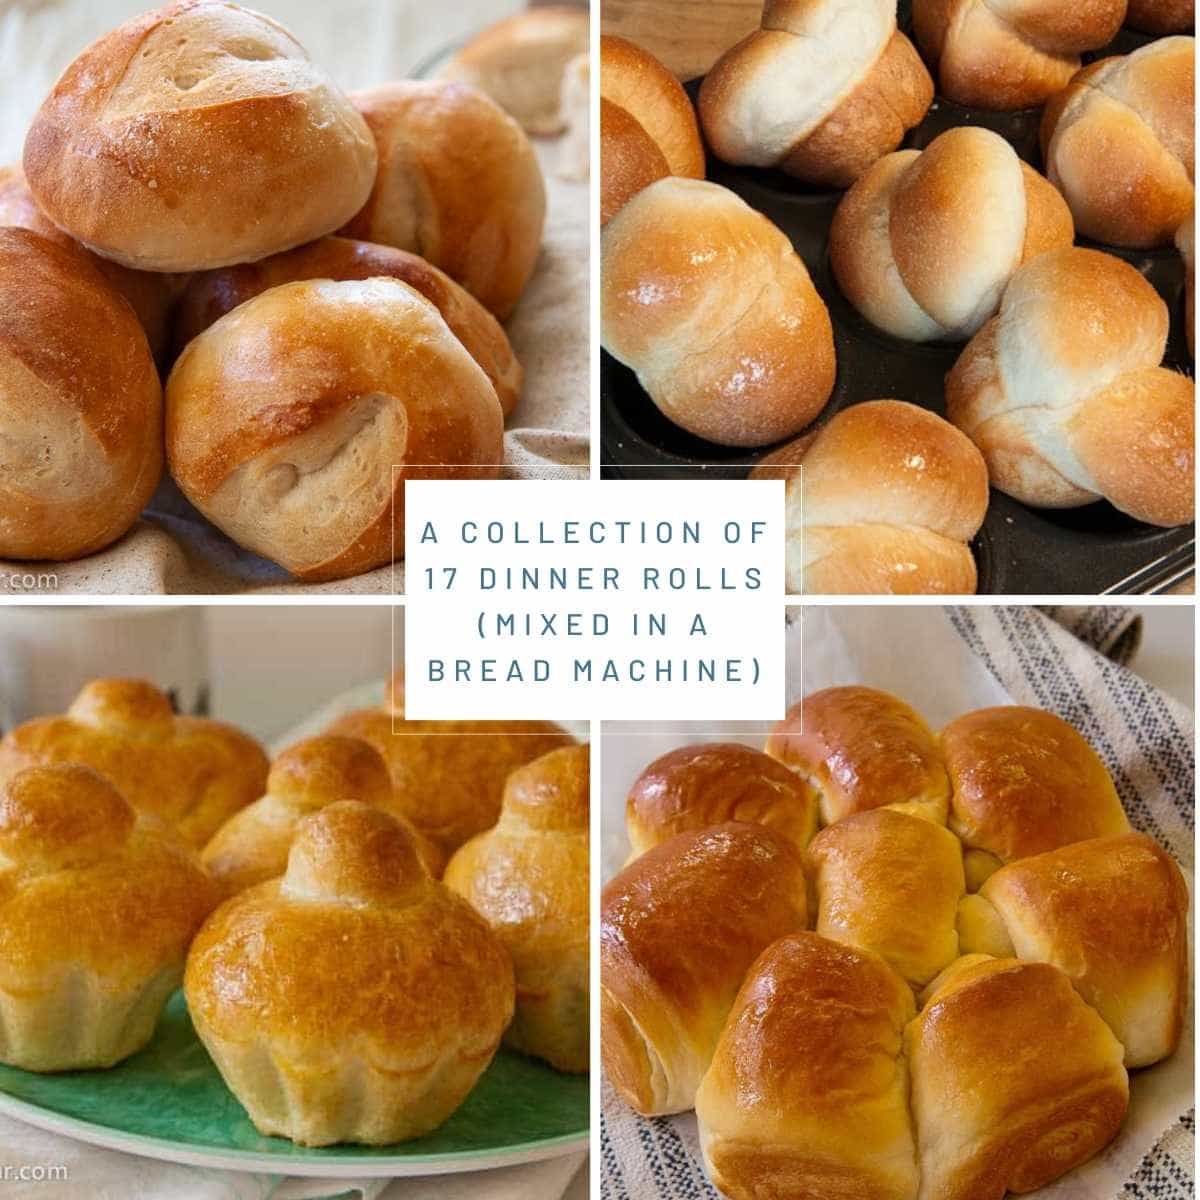  a collection of 17 dinner roll recipes made with a bread machine or bread maker